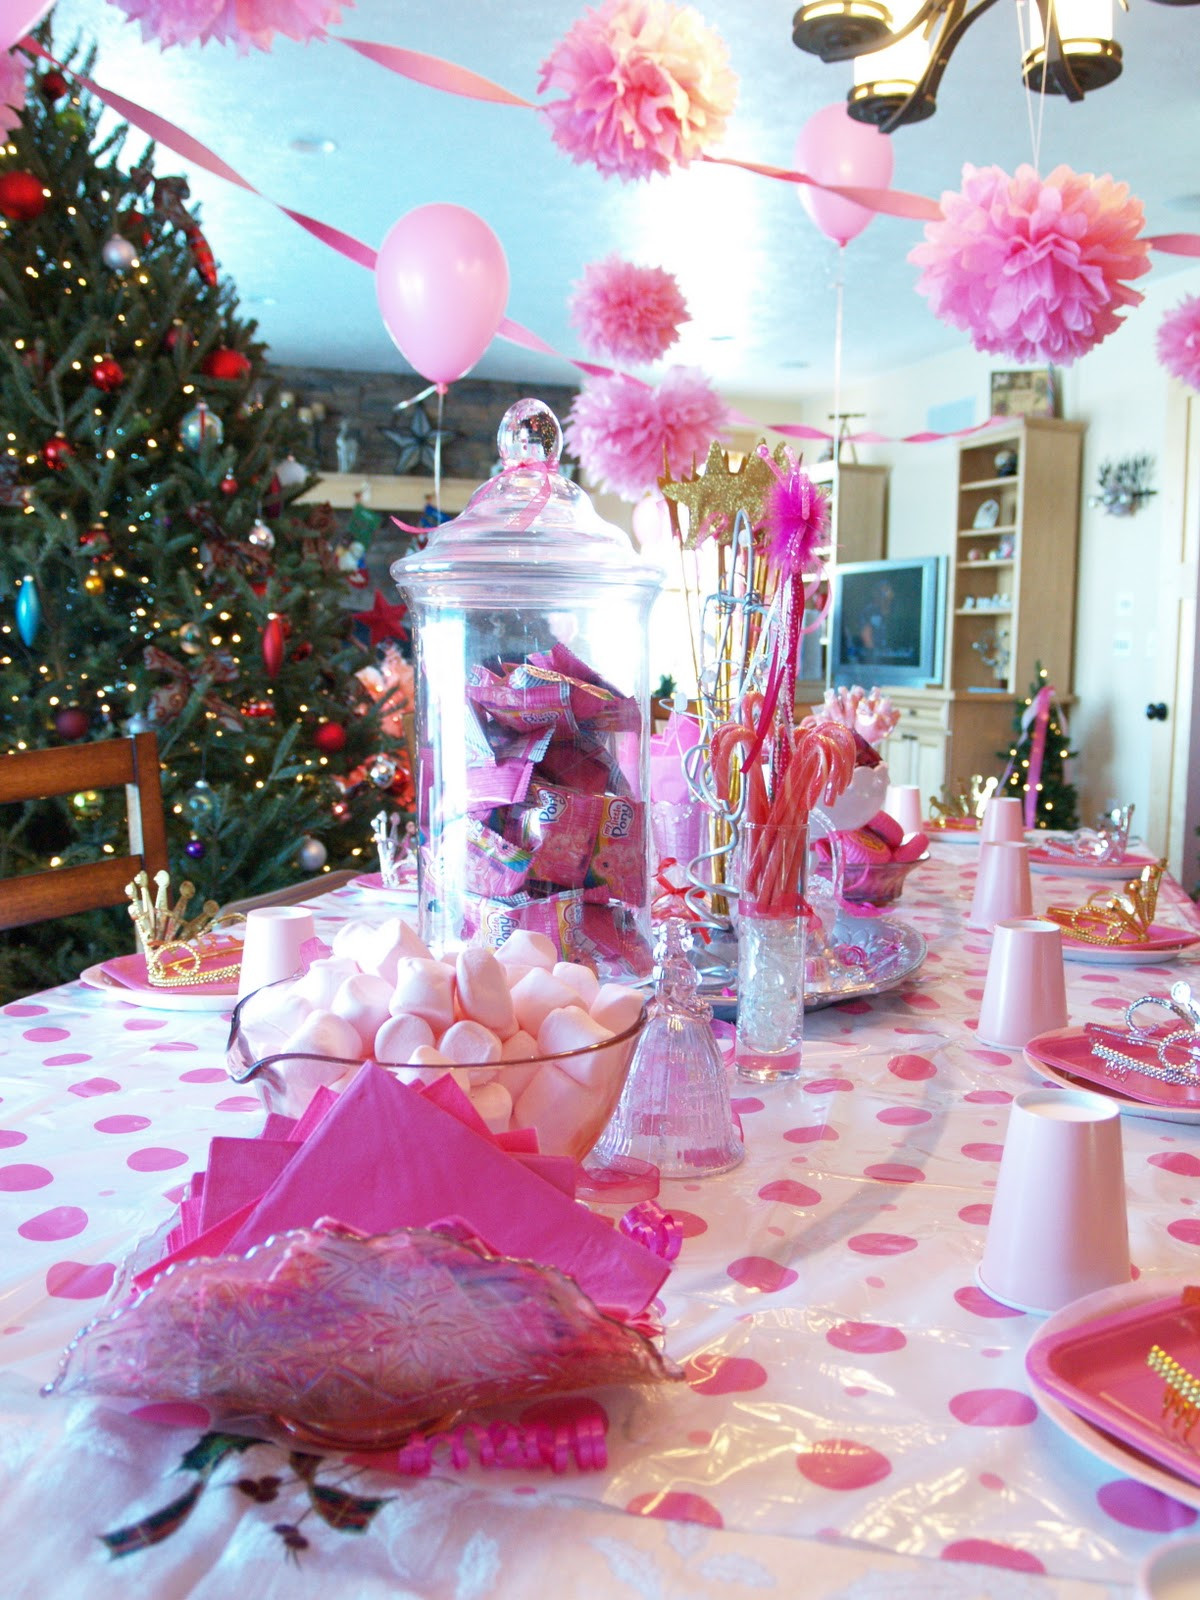 How To Decorate Birthday Party
 Show Us Your Life A Pinkalicious Birthday Party The